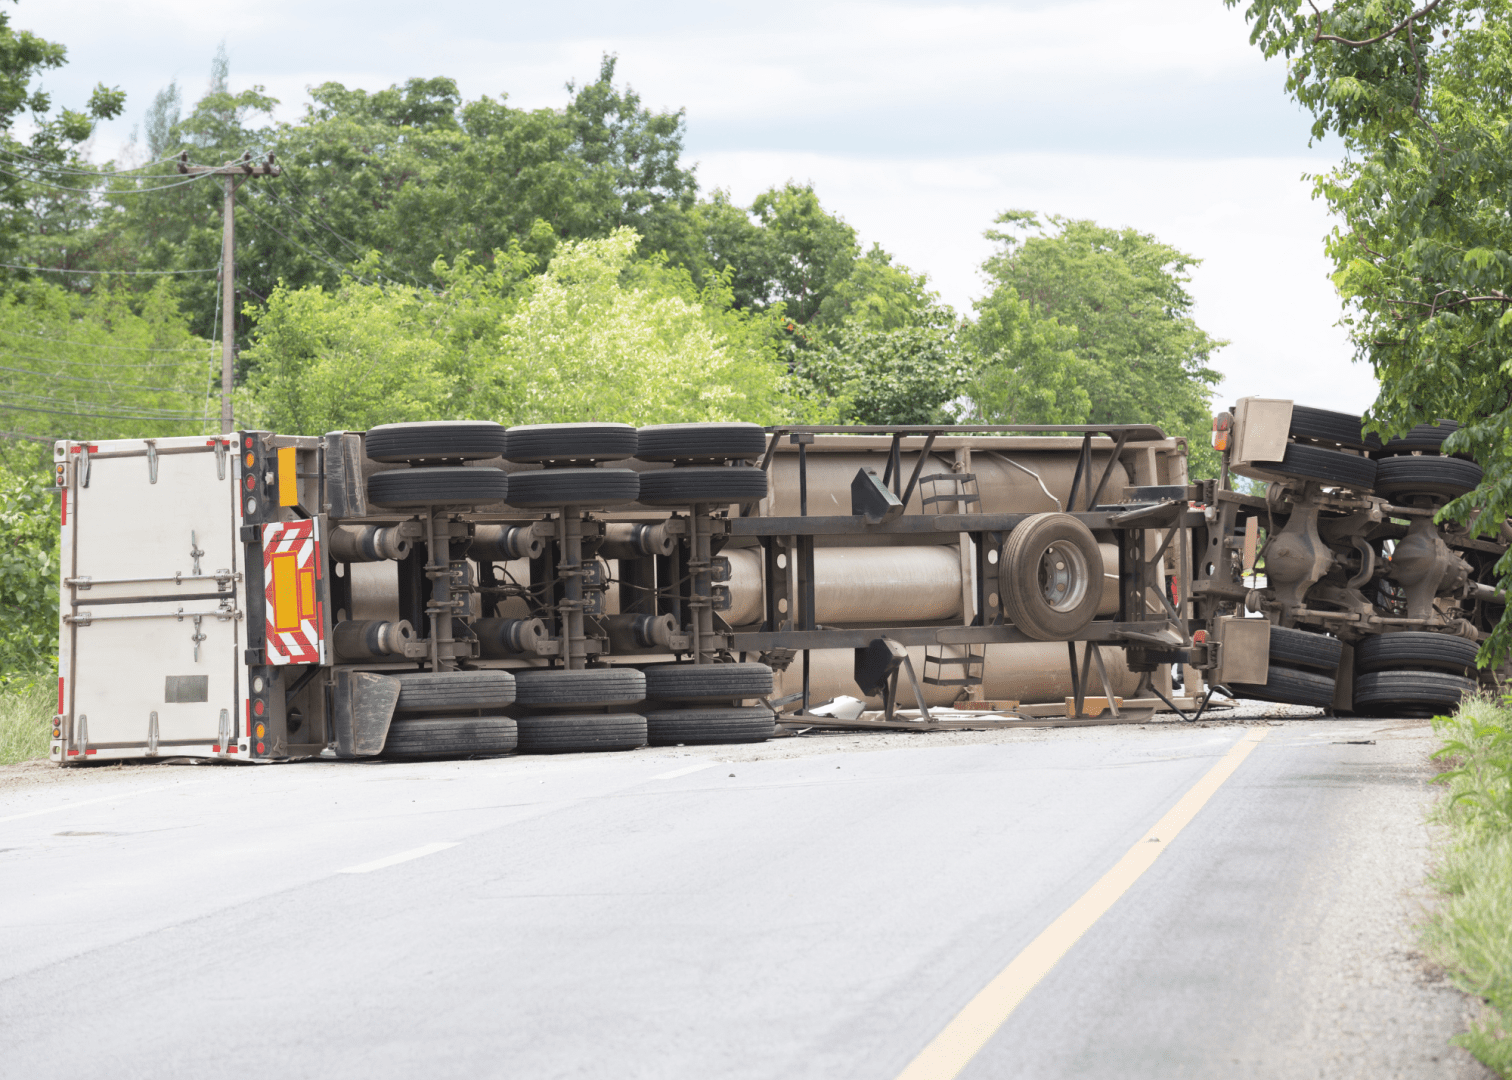 Overturned Comemricial Truck - Fort Mill Truck Accident Attorney